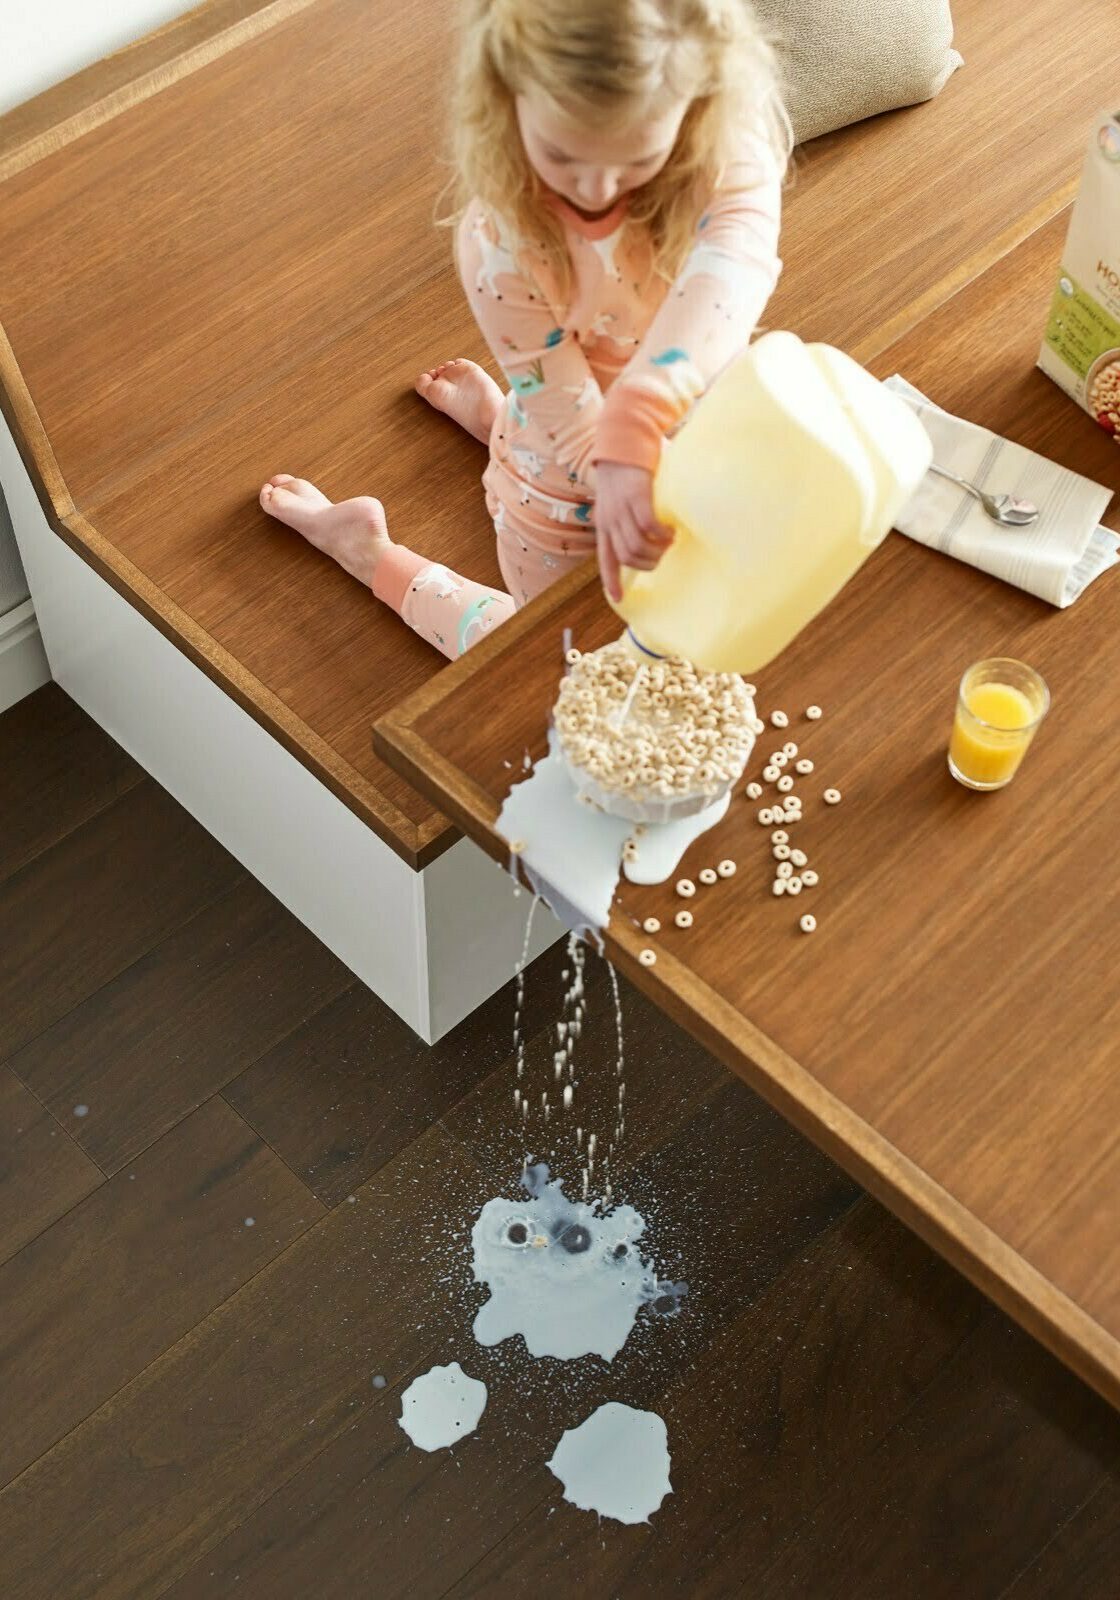 Milk spill cleaning | Rock Tops Surfaces